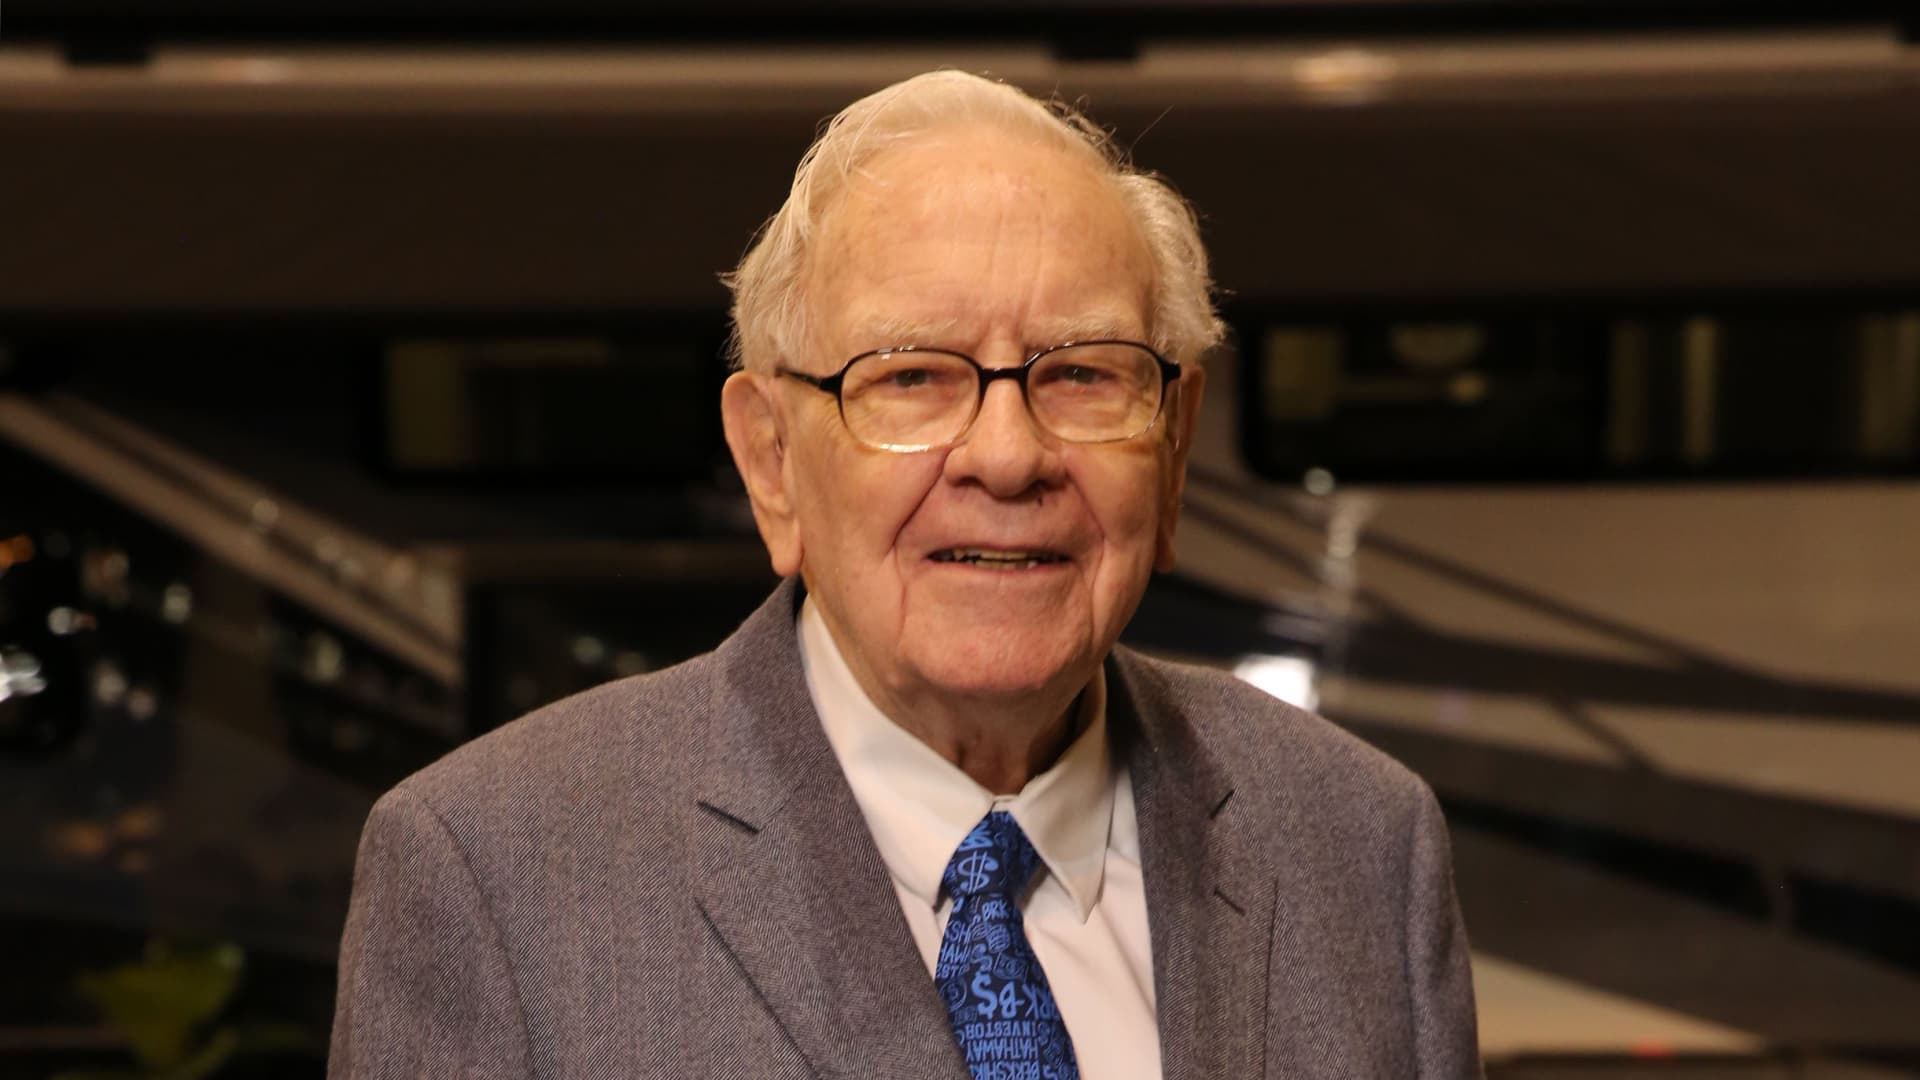 Investing tips from Warren Buffett to start the new year on the right foot